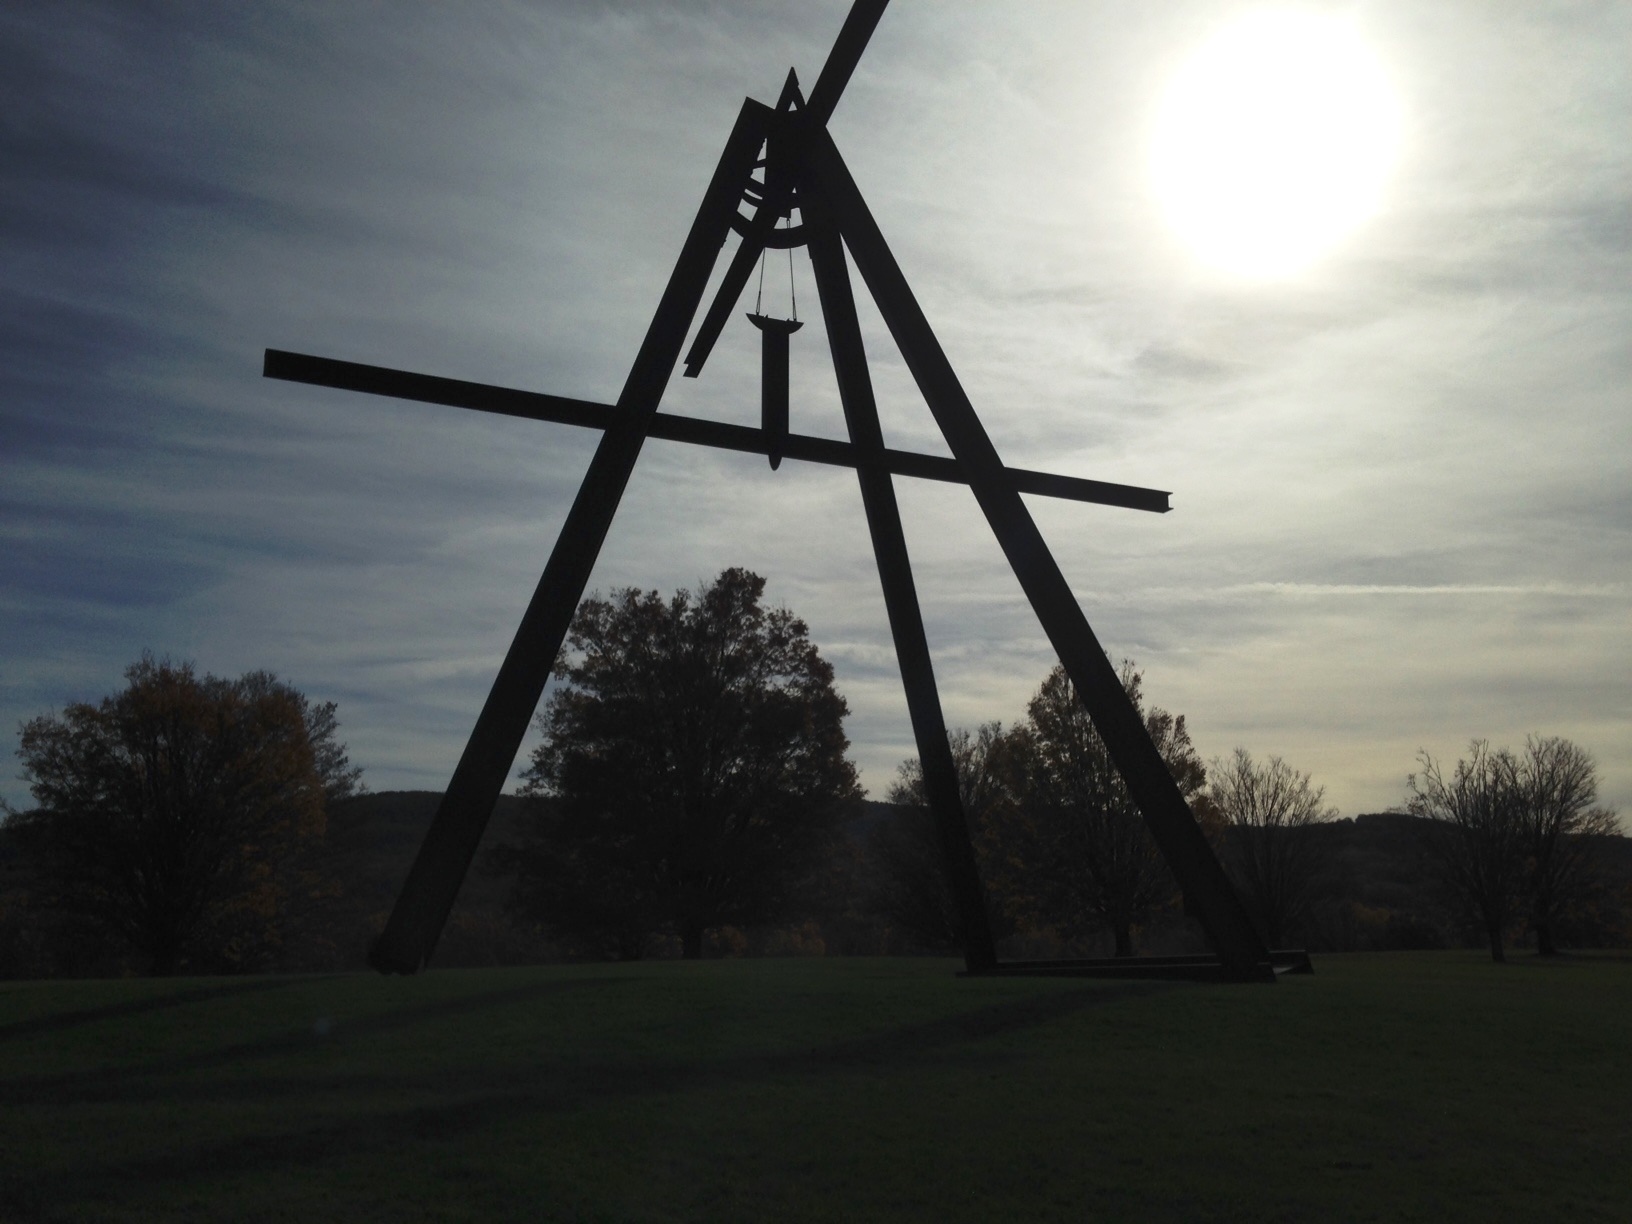 Outdoor Sculpture Park in the Hudson Valley - Storm King